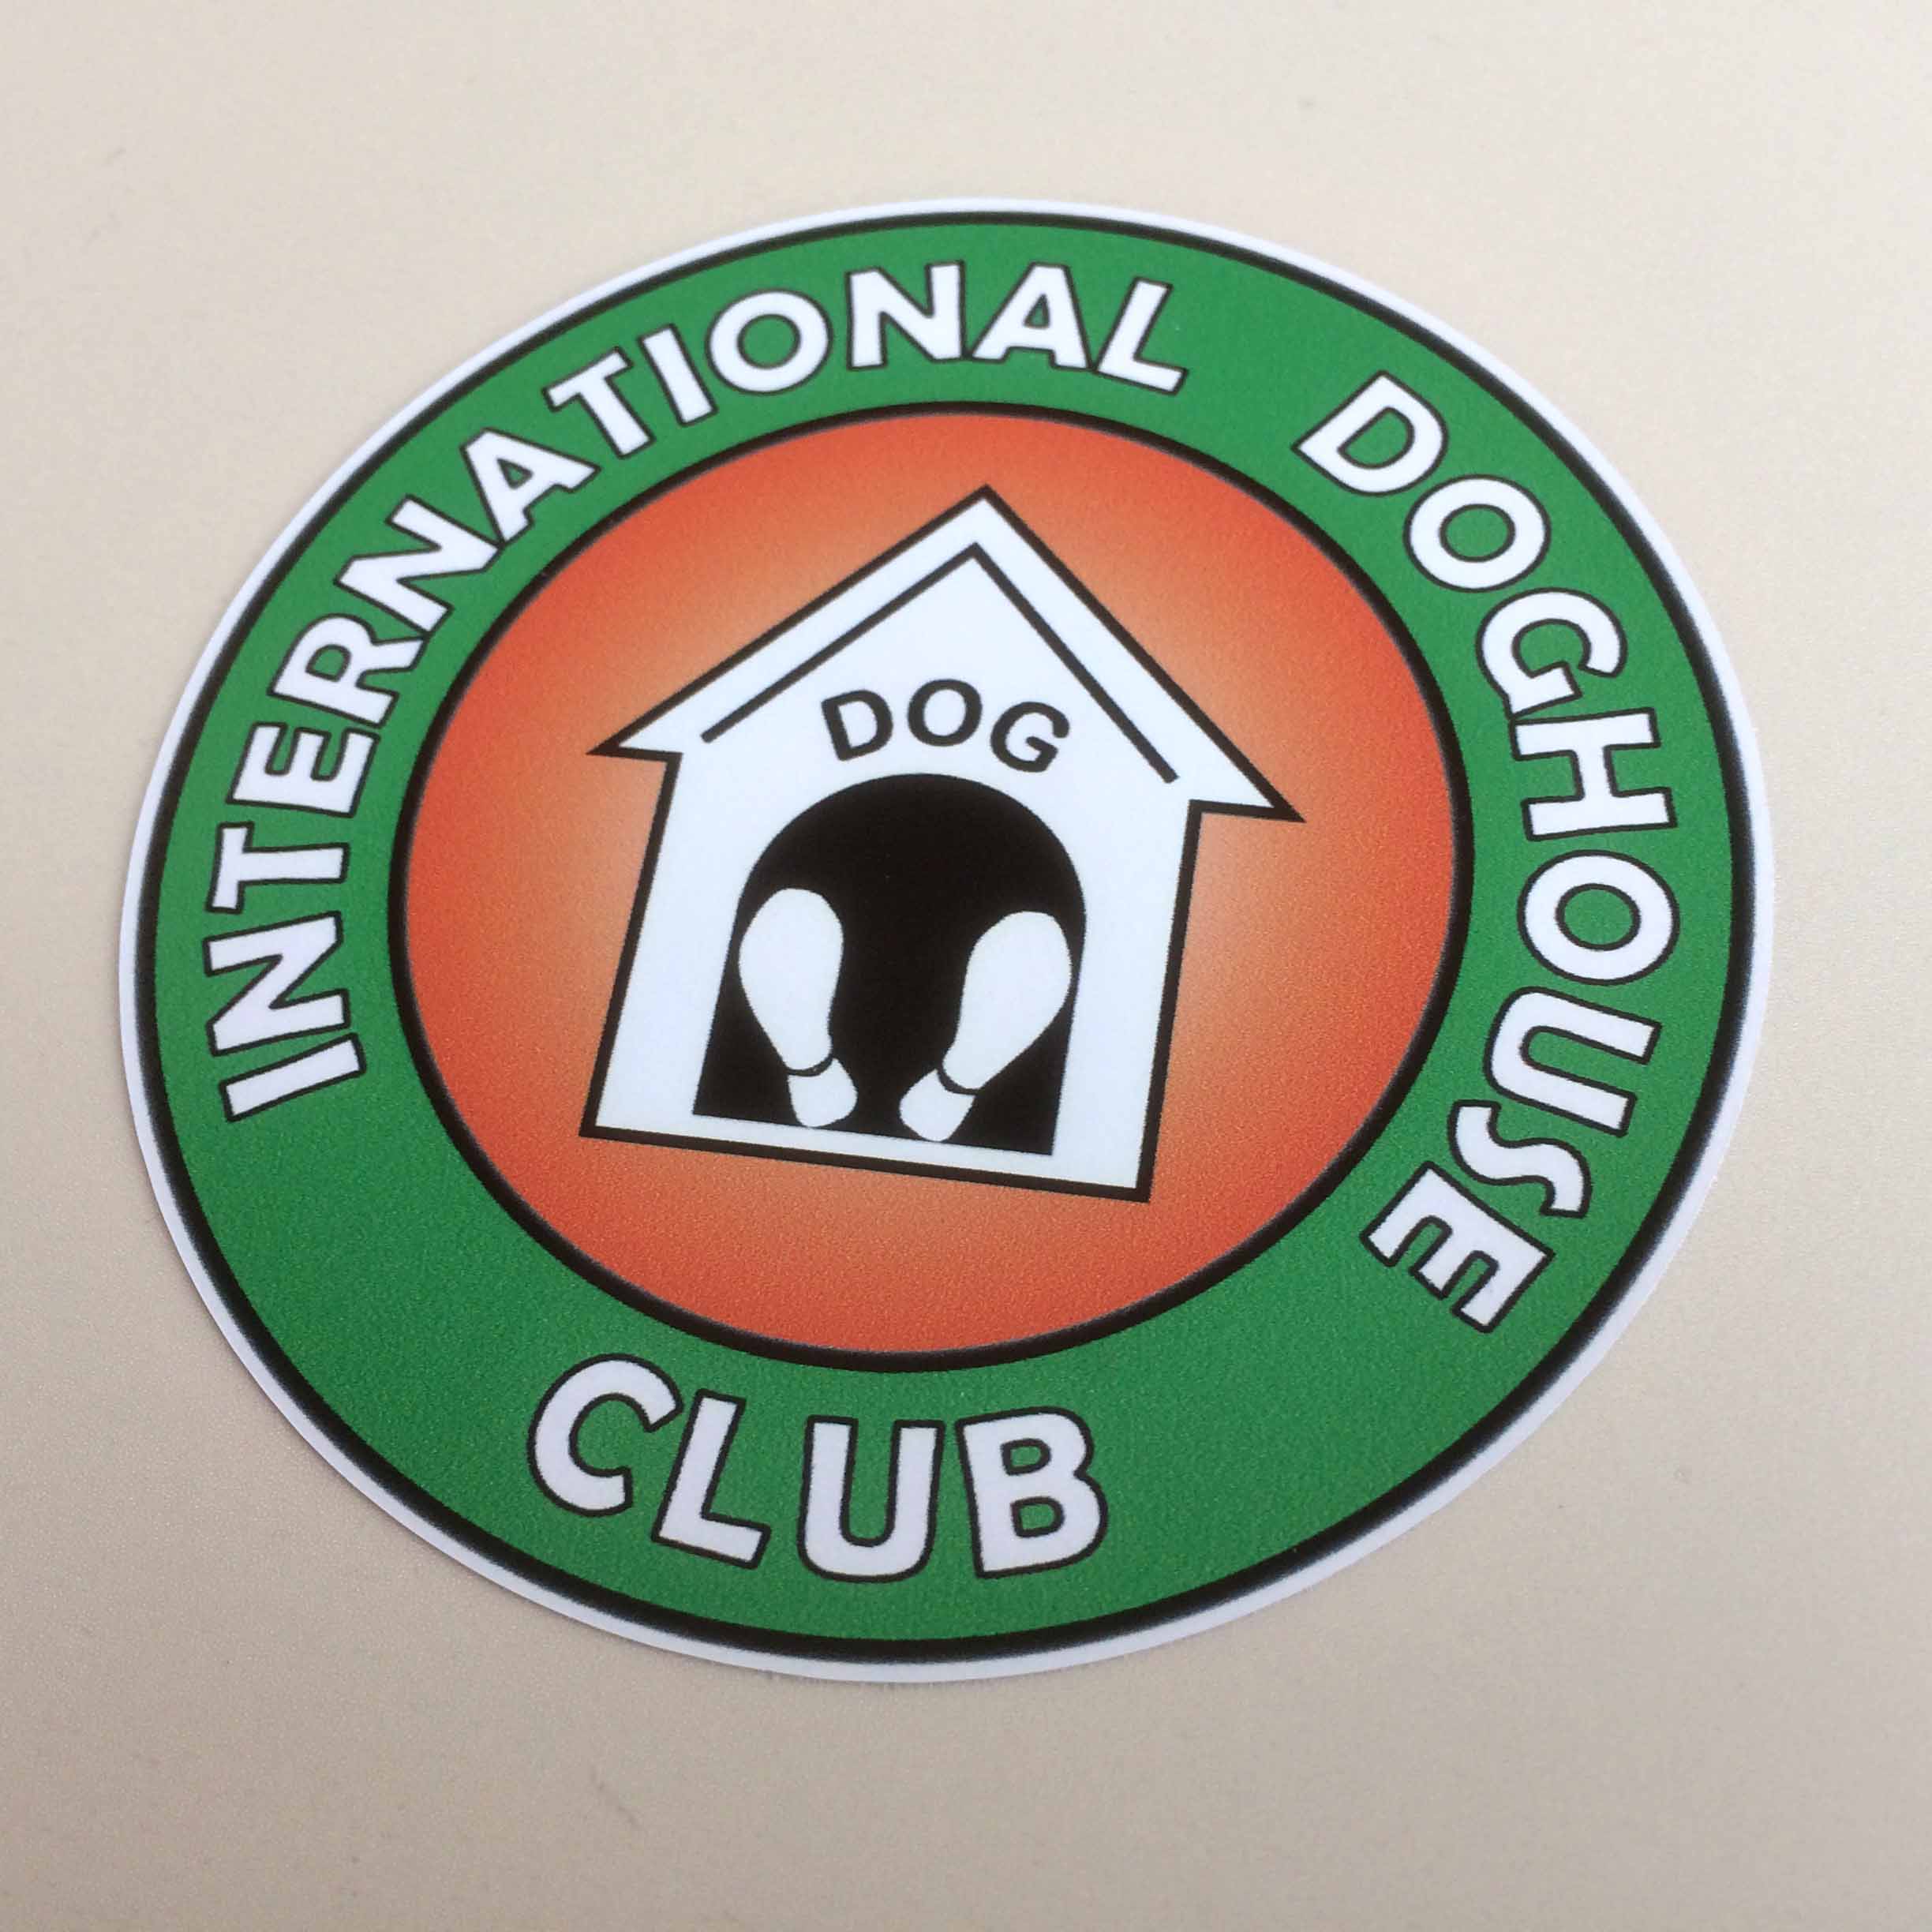 INTERNATIONAL DOGHOUSE CLUB STICKER. International Doghouse Club in white lettering on a green outer circle surrounds a white kennel on an orange background. The soles of two feet are in the doorway with the word Dog above it.